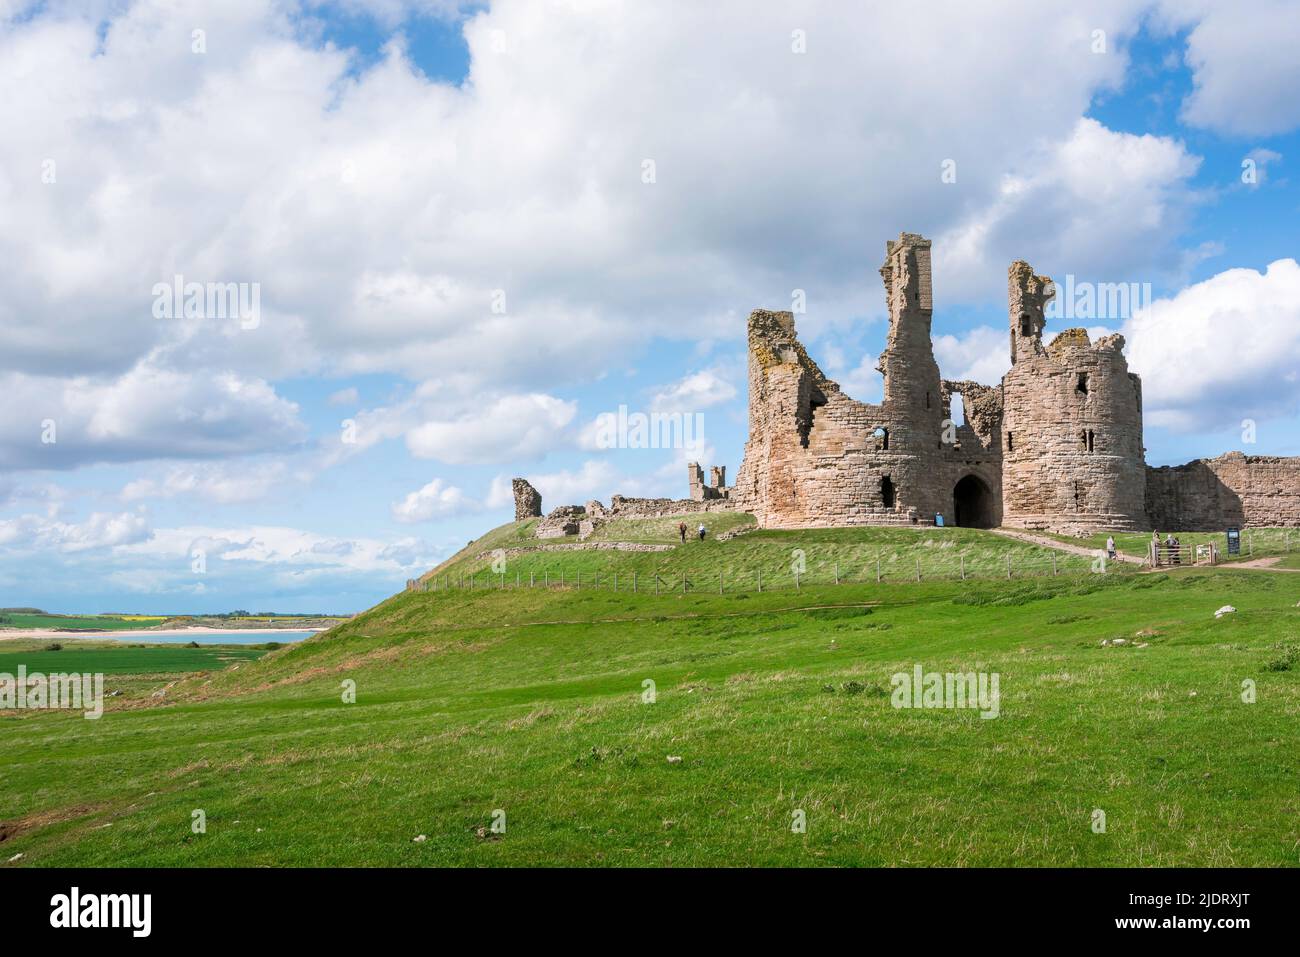 Dunstanburgh Castle, view in late spring of the ruined 14th century Dunstanburgh Castle sited on the Northumberland coast near Embleton Bay, England Stock Photo